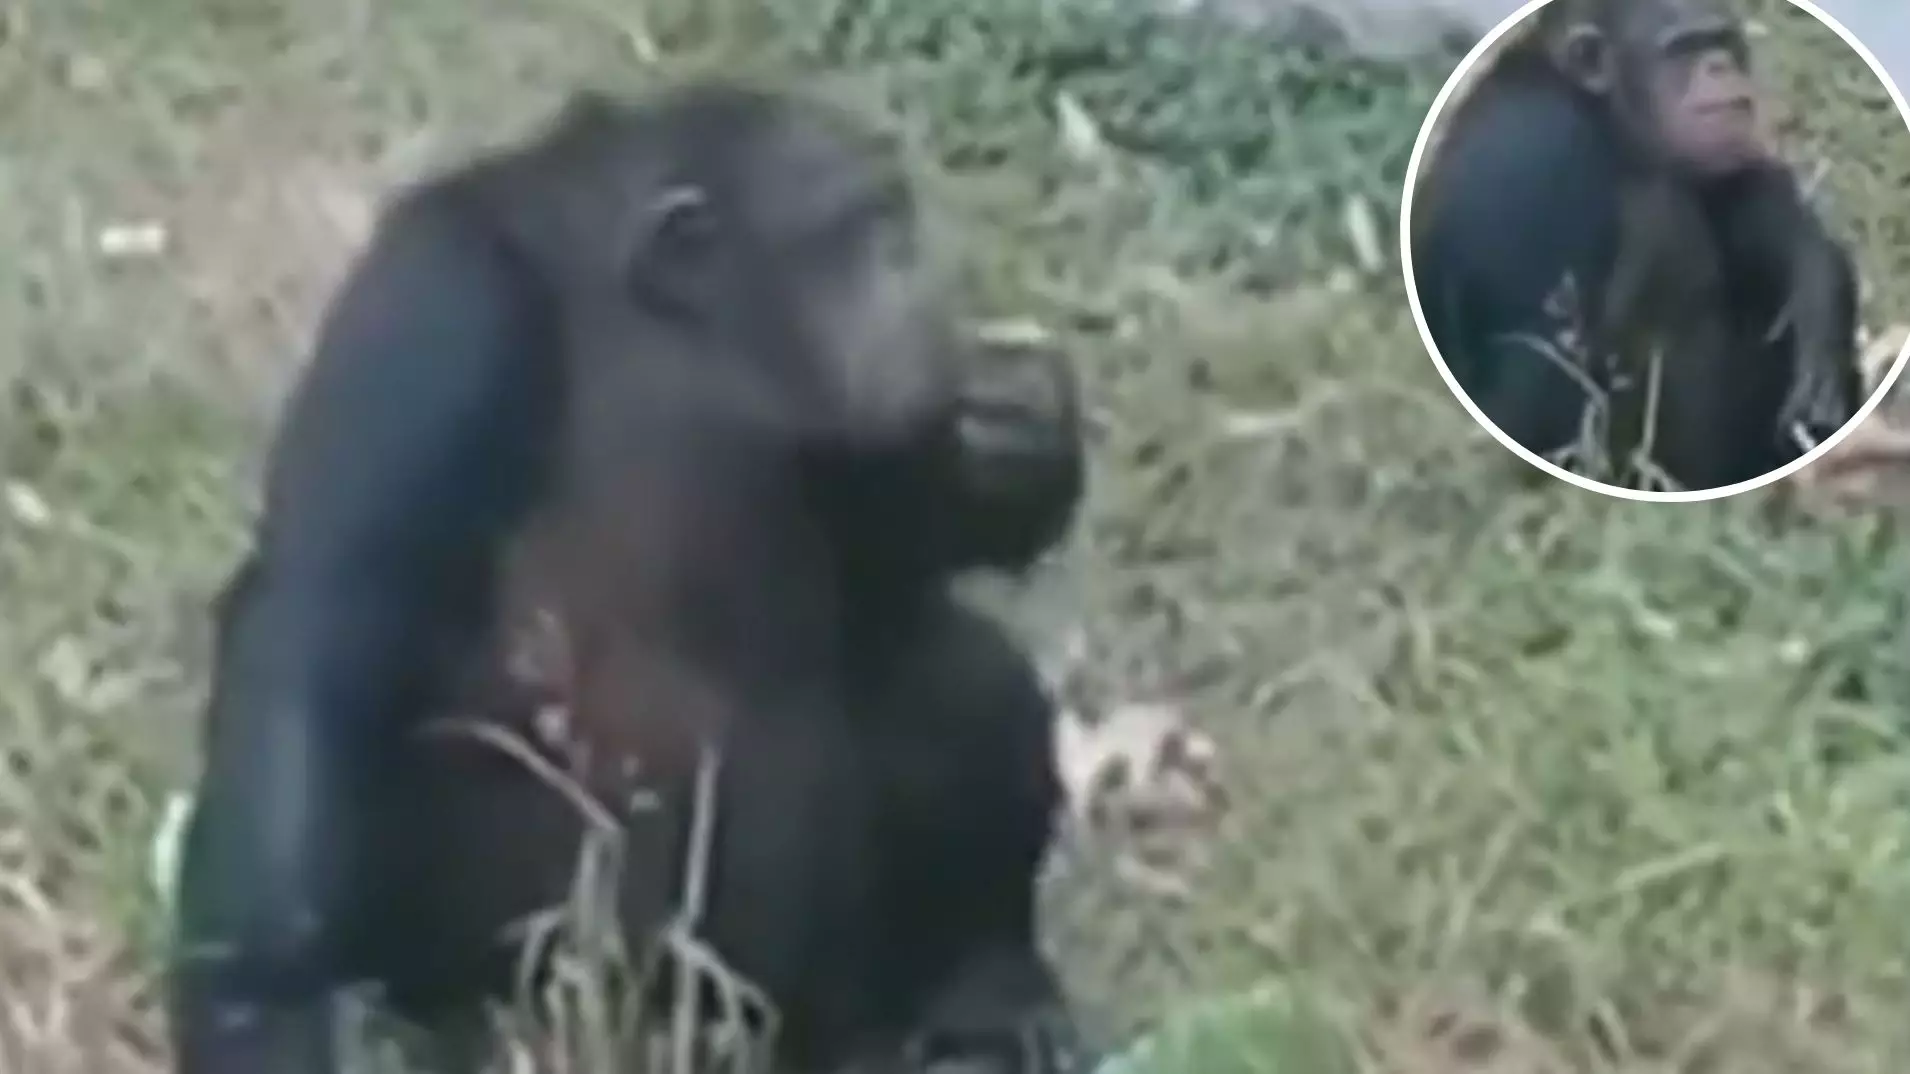 Video Shows Chimpanzee Smoking After Tourist Throws Cigarette Into Zoo Enclosure